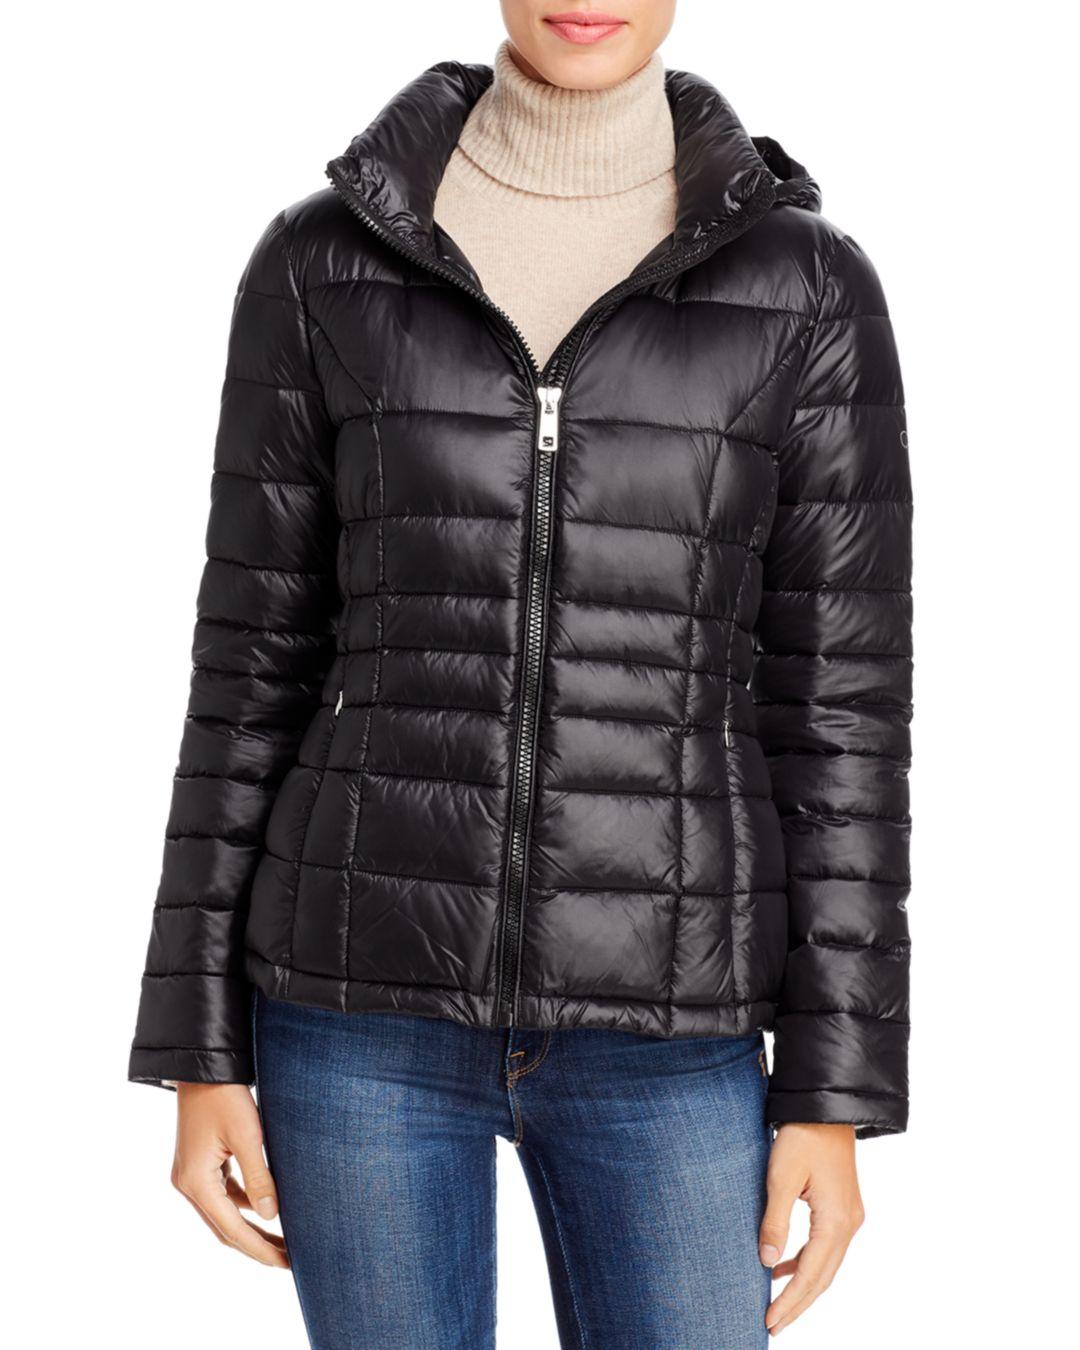 Calvin Klein Synthetic Packable Lightweight Puffer Jacket in Black - Lyst